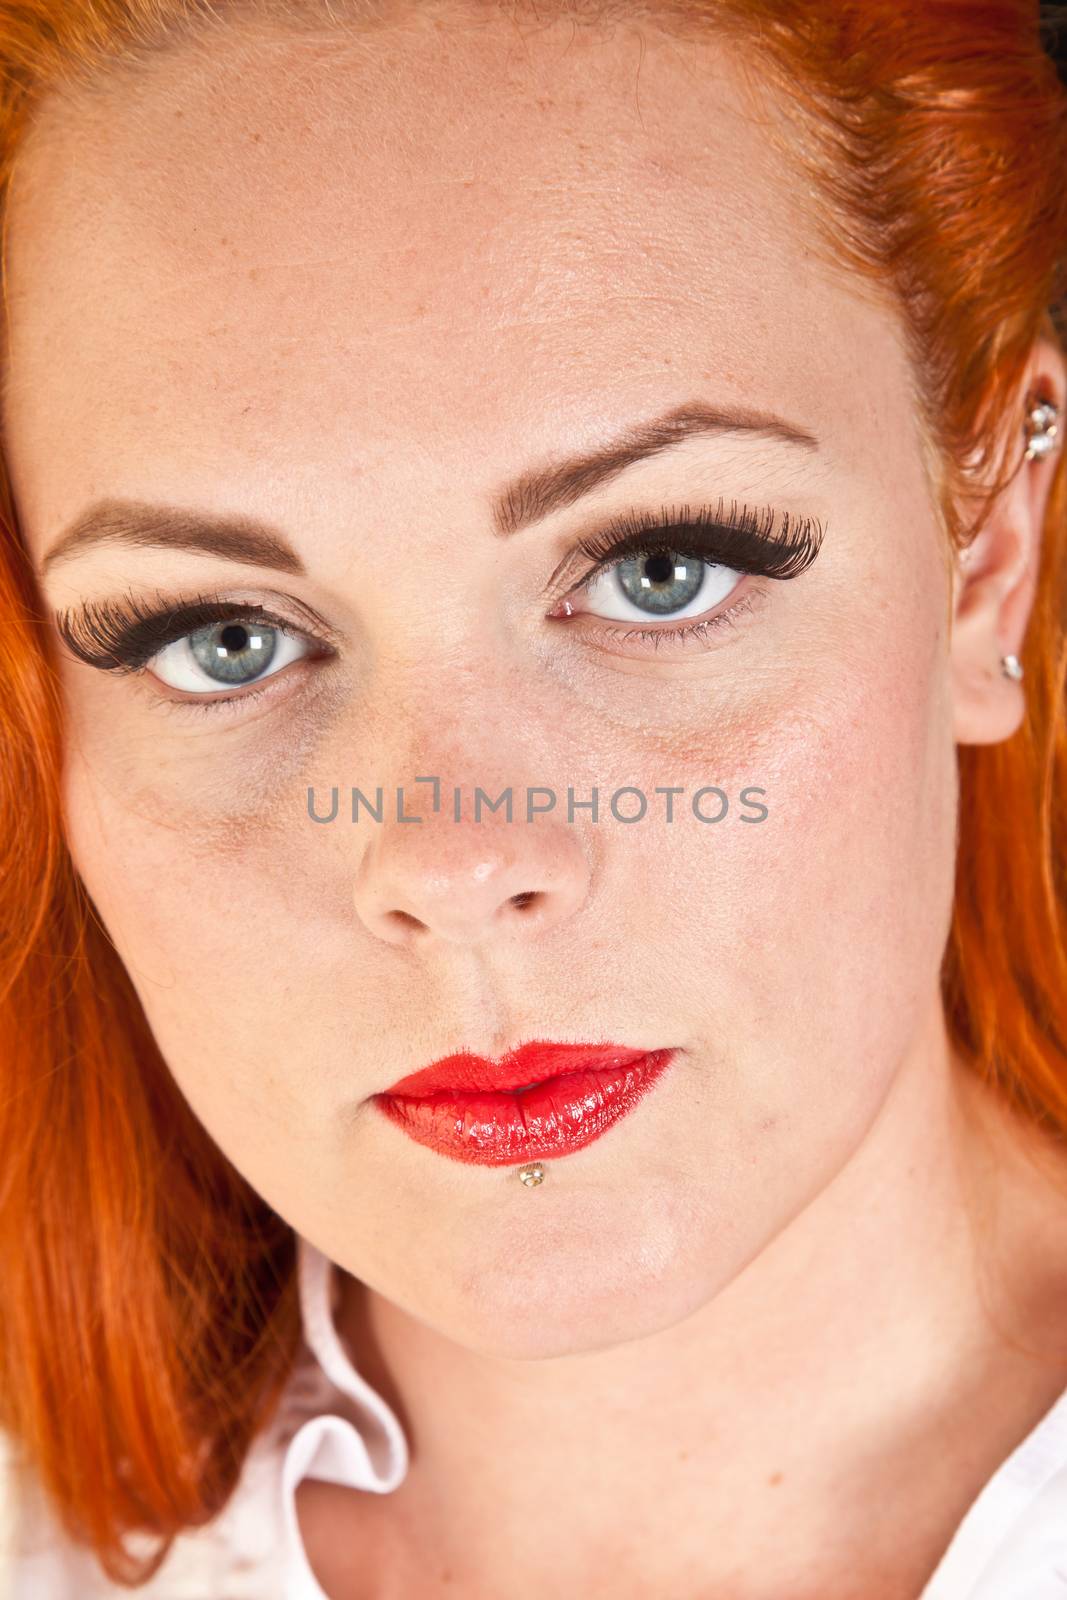 Red hair girl in pin-up style portrait shot in studio by jeancliclac